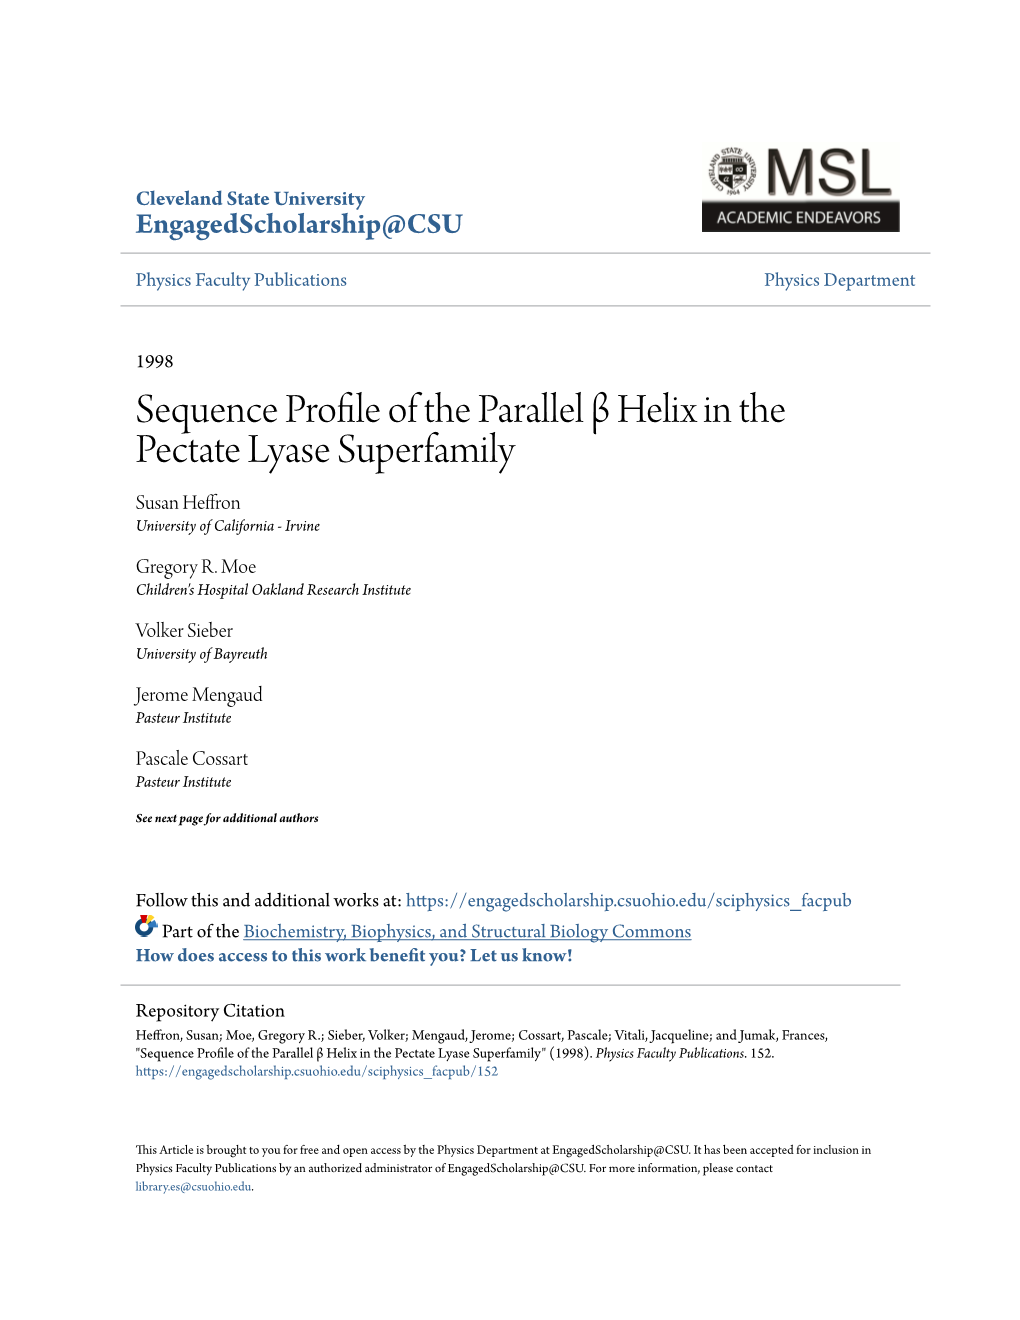 Sequence Profile of the Parallel Β Helix in the Pectate Lyase Superfamily Susan Heffron University of California - Irvine